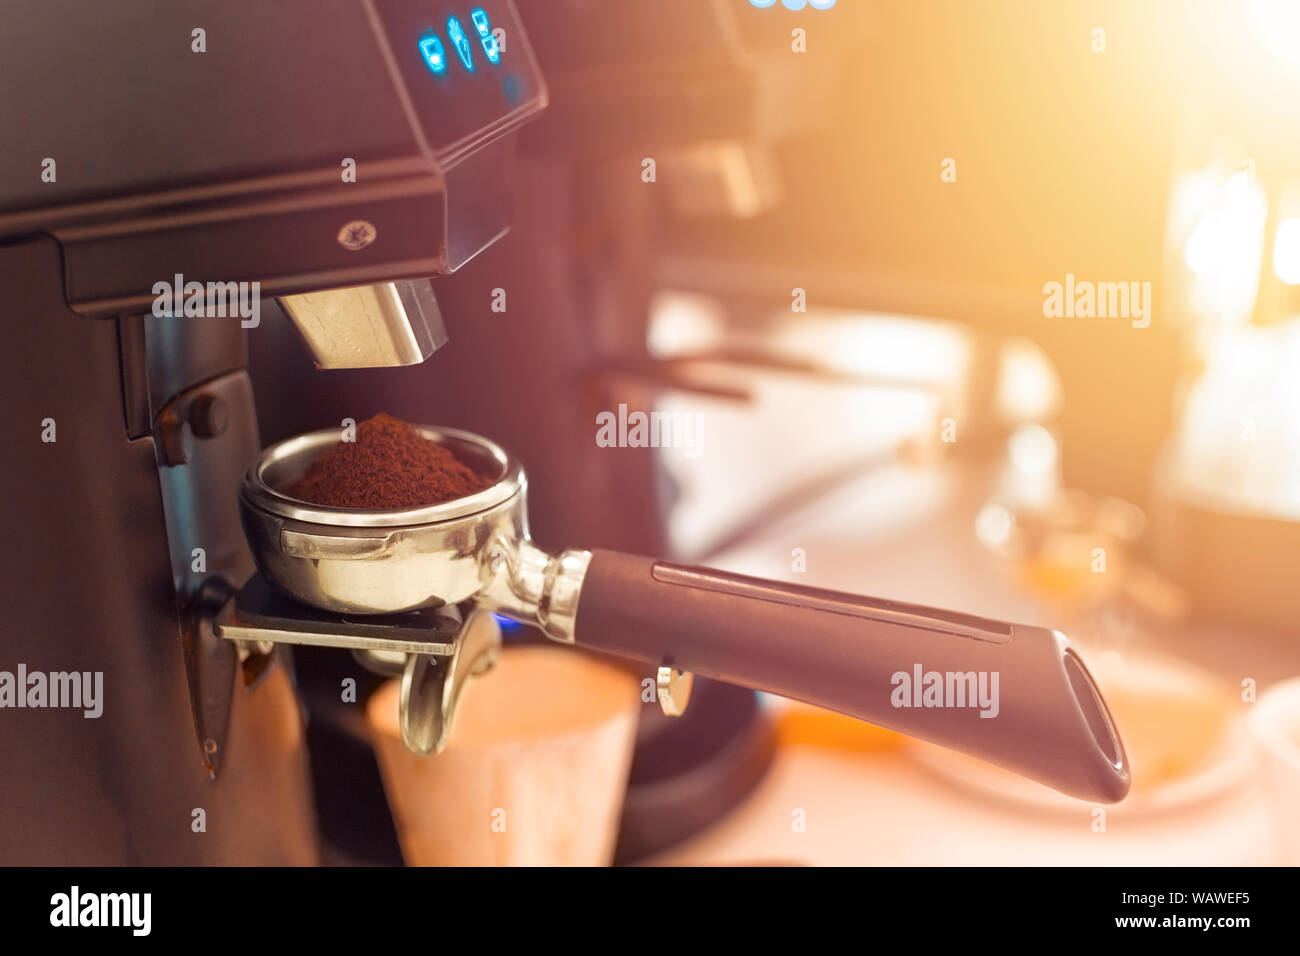 Barista grinding coffee ready for perfect cup of espresso in coffee shop Stock Photo